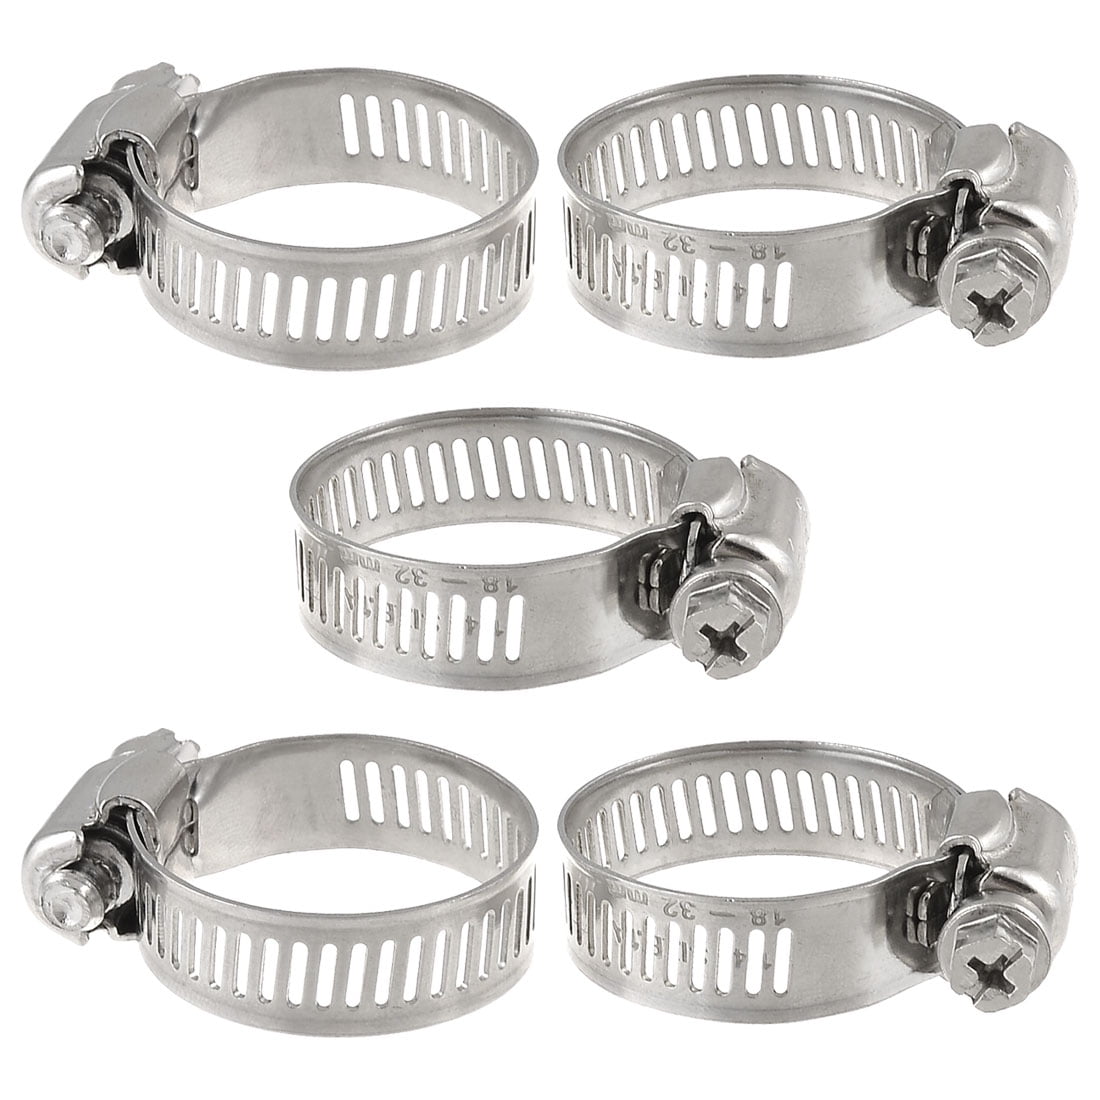 Globalflashdeal 10 Pcs 9mm-16mm Adjustable Stainless Steel Worm Drive Hose Clamp